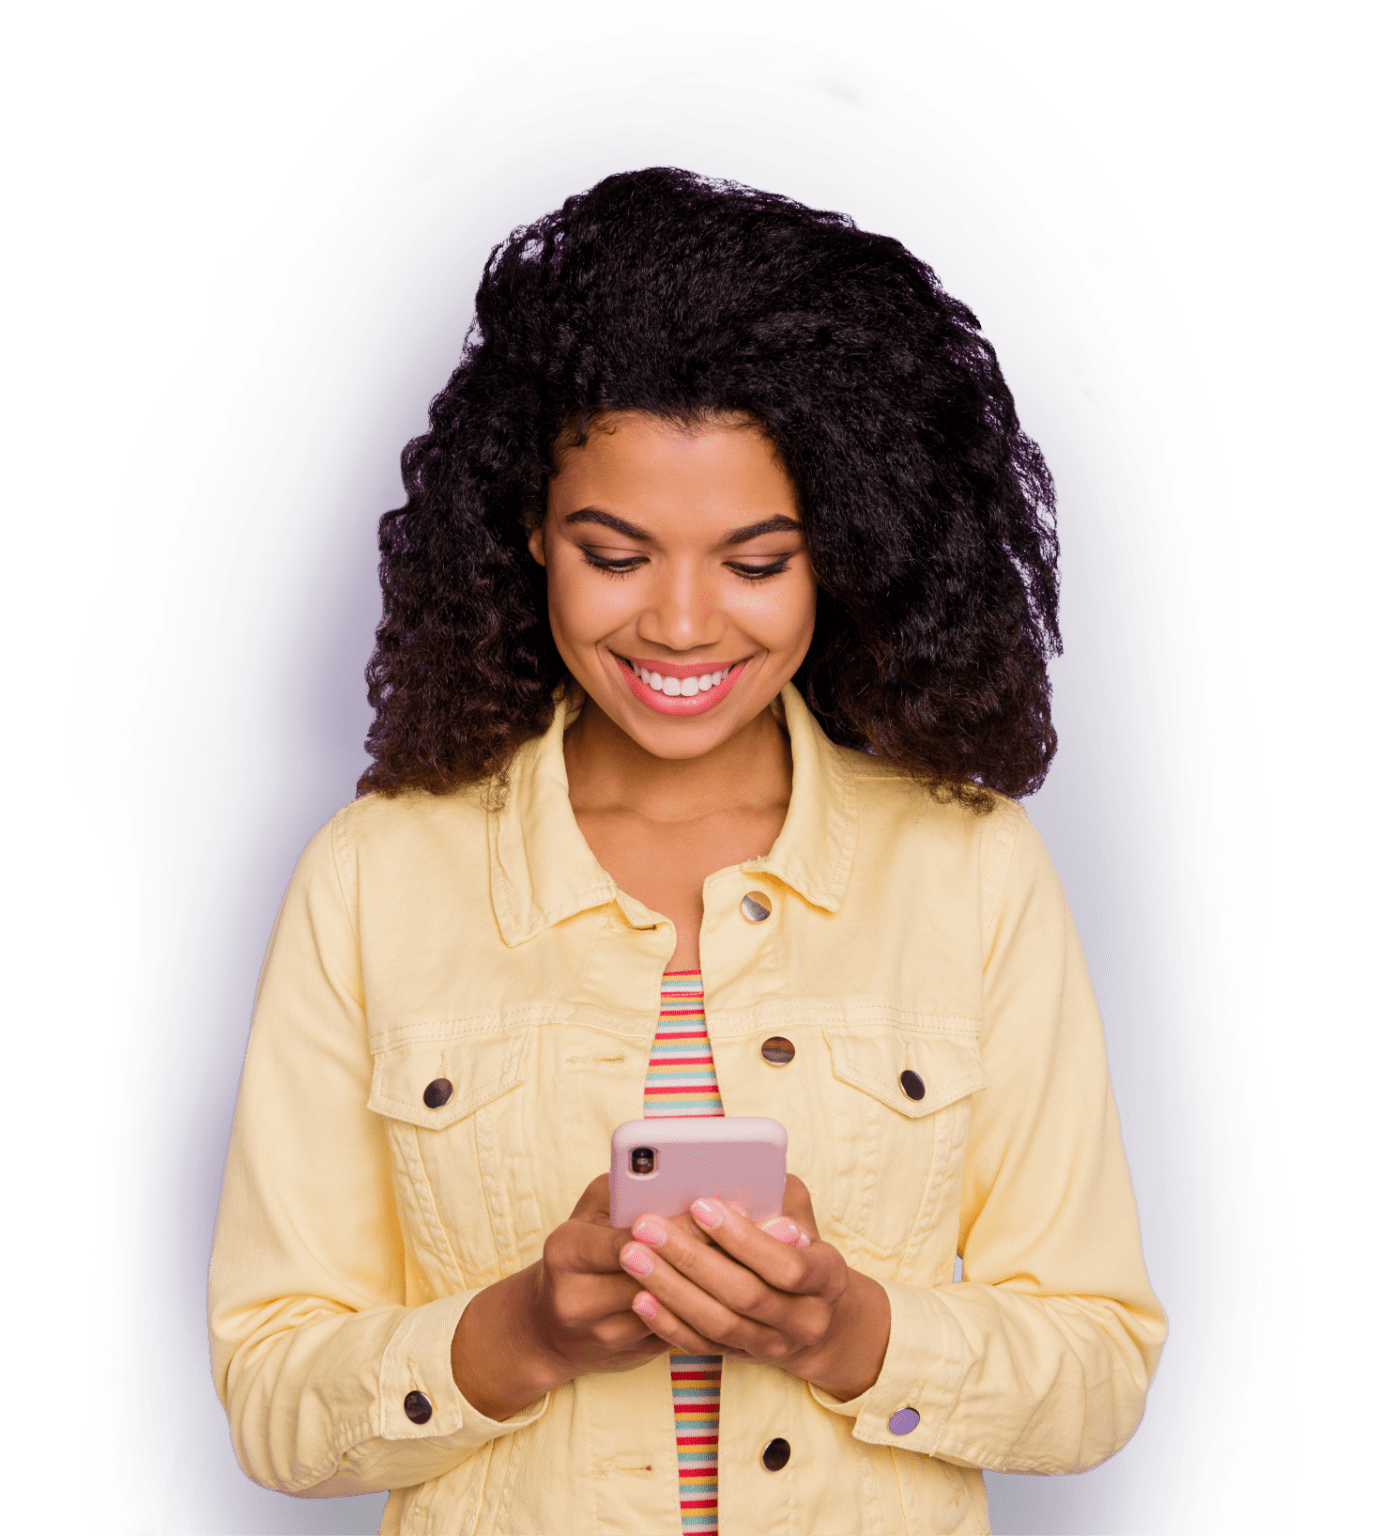 Image of a woman smiling looking down at her phone